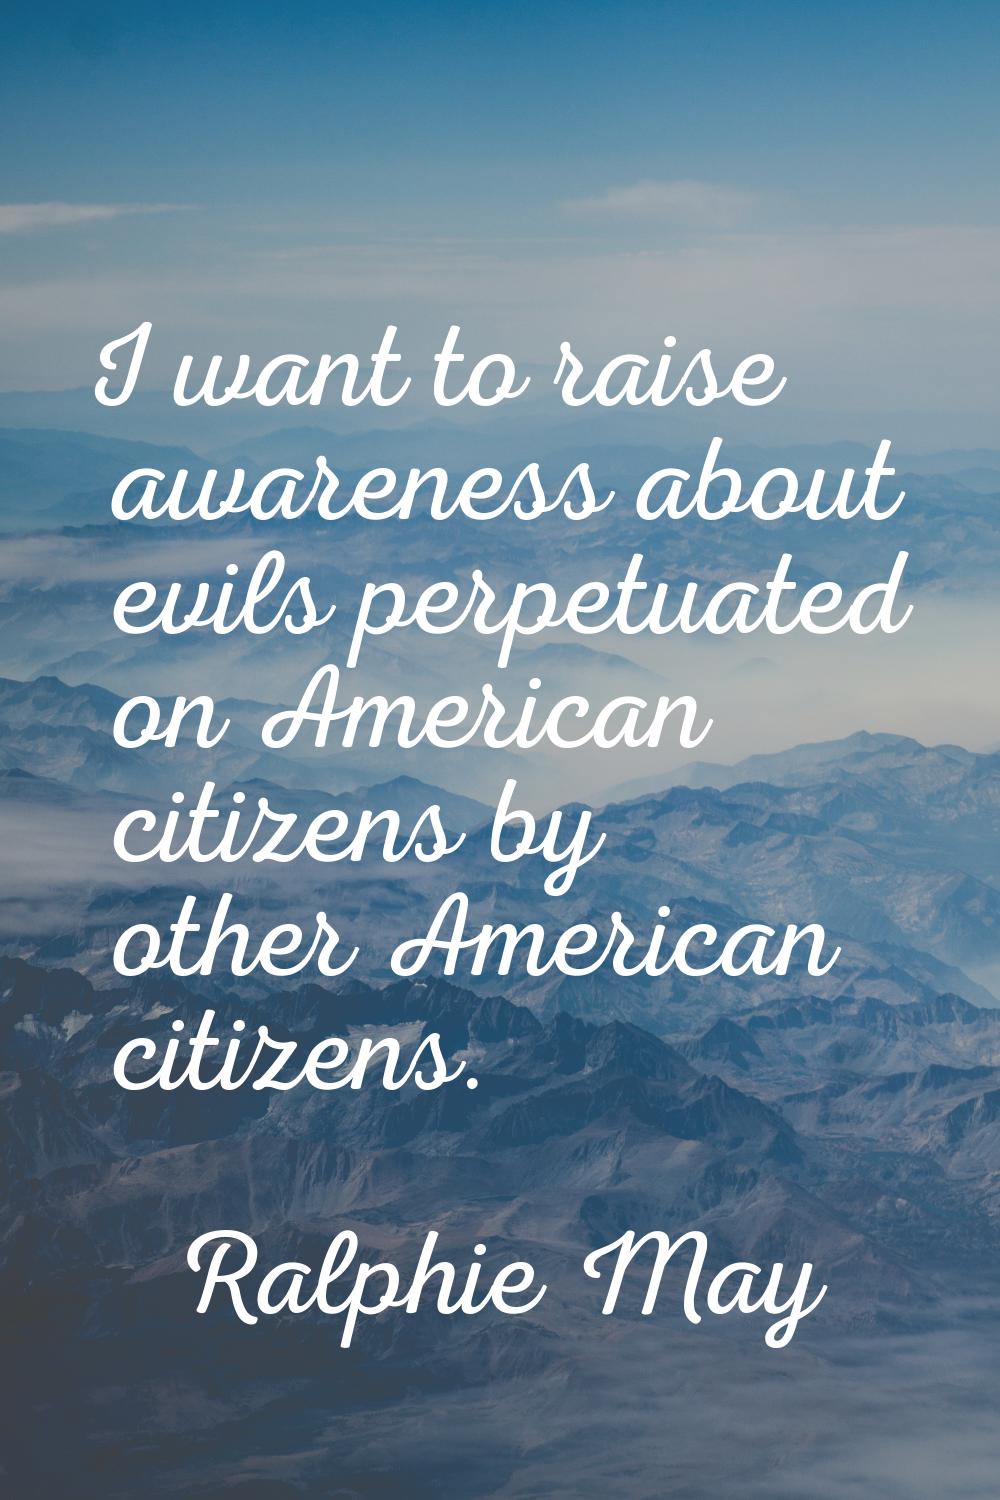 I want to raise awareness about evils perpetuated on American citizens by other American citizens.